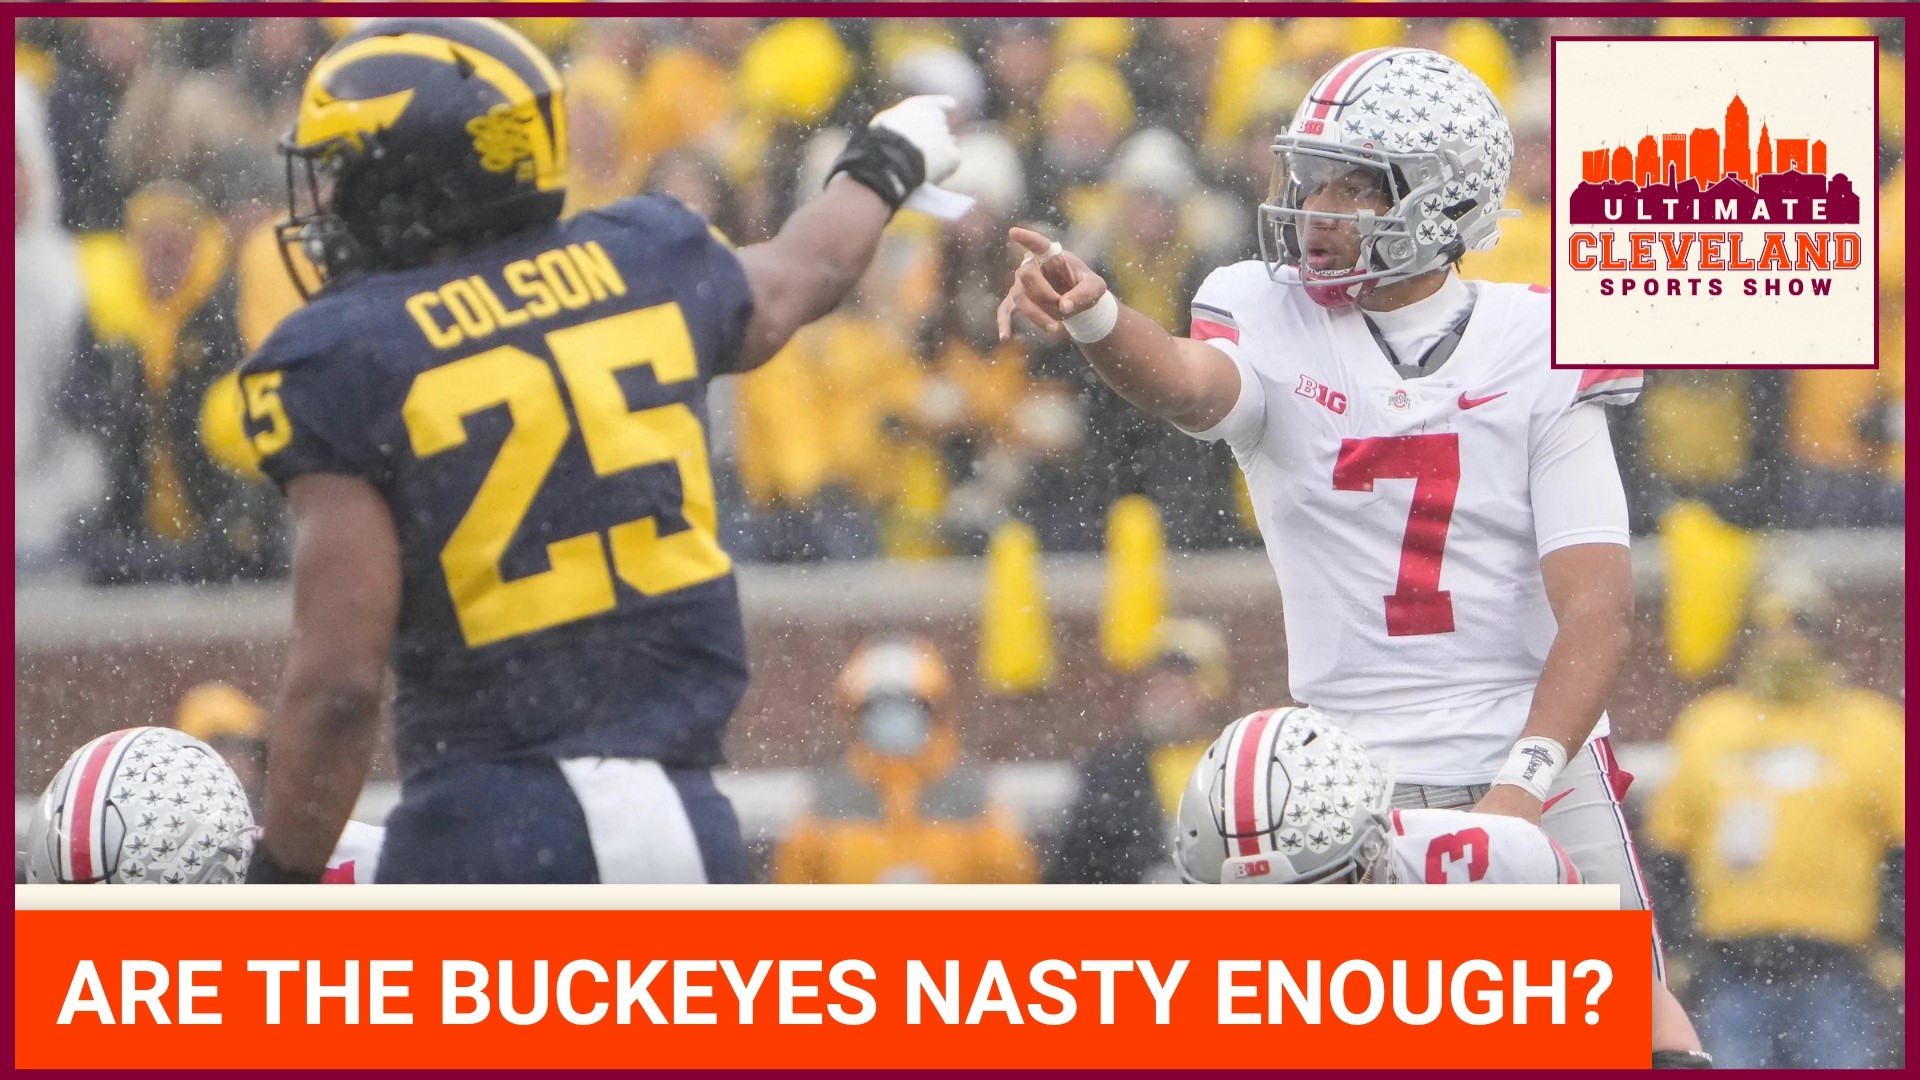 This version of the Ohio State Buckeyes are more finesse than the great teams of the past. Do the Buckeyes have enough nasty to beat Michigan?